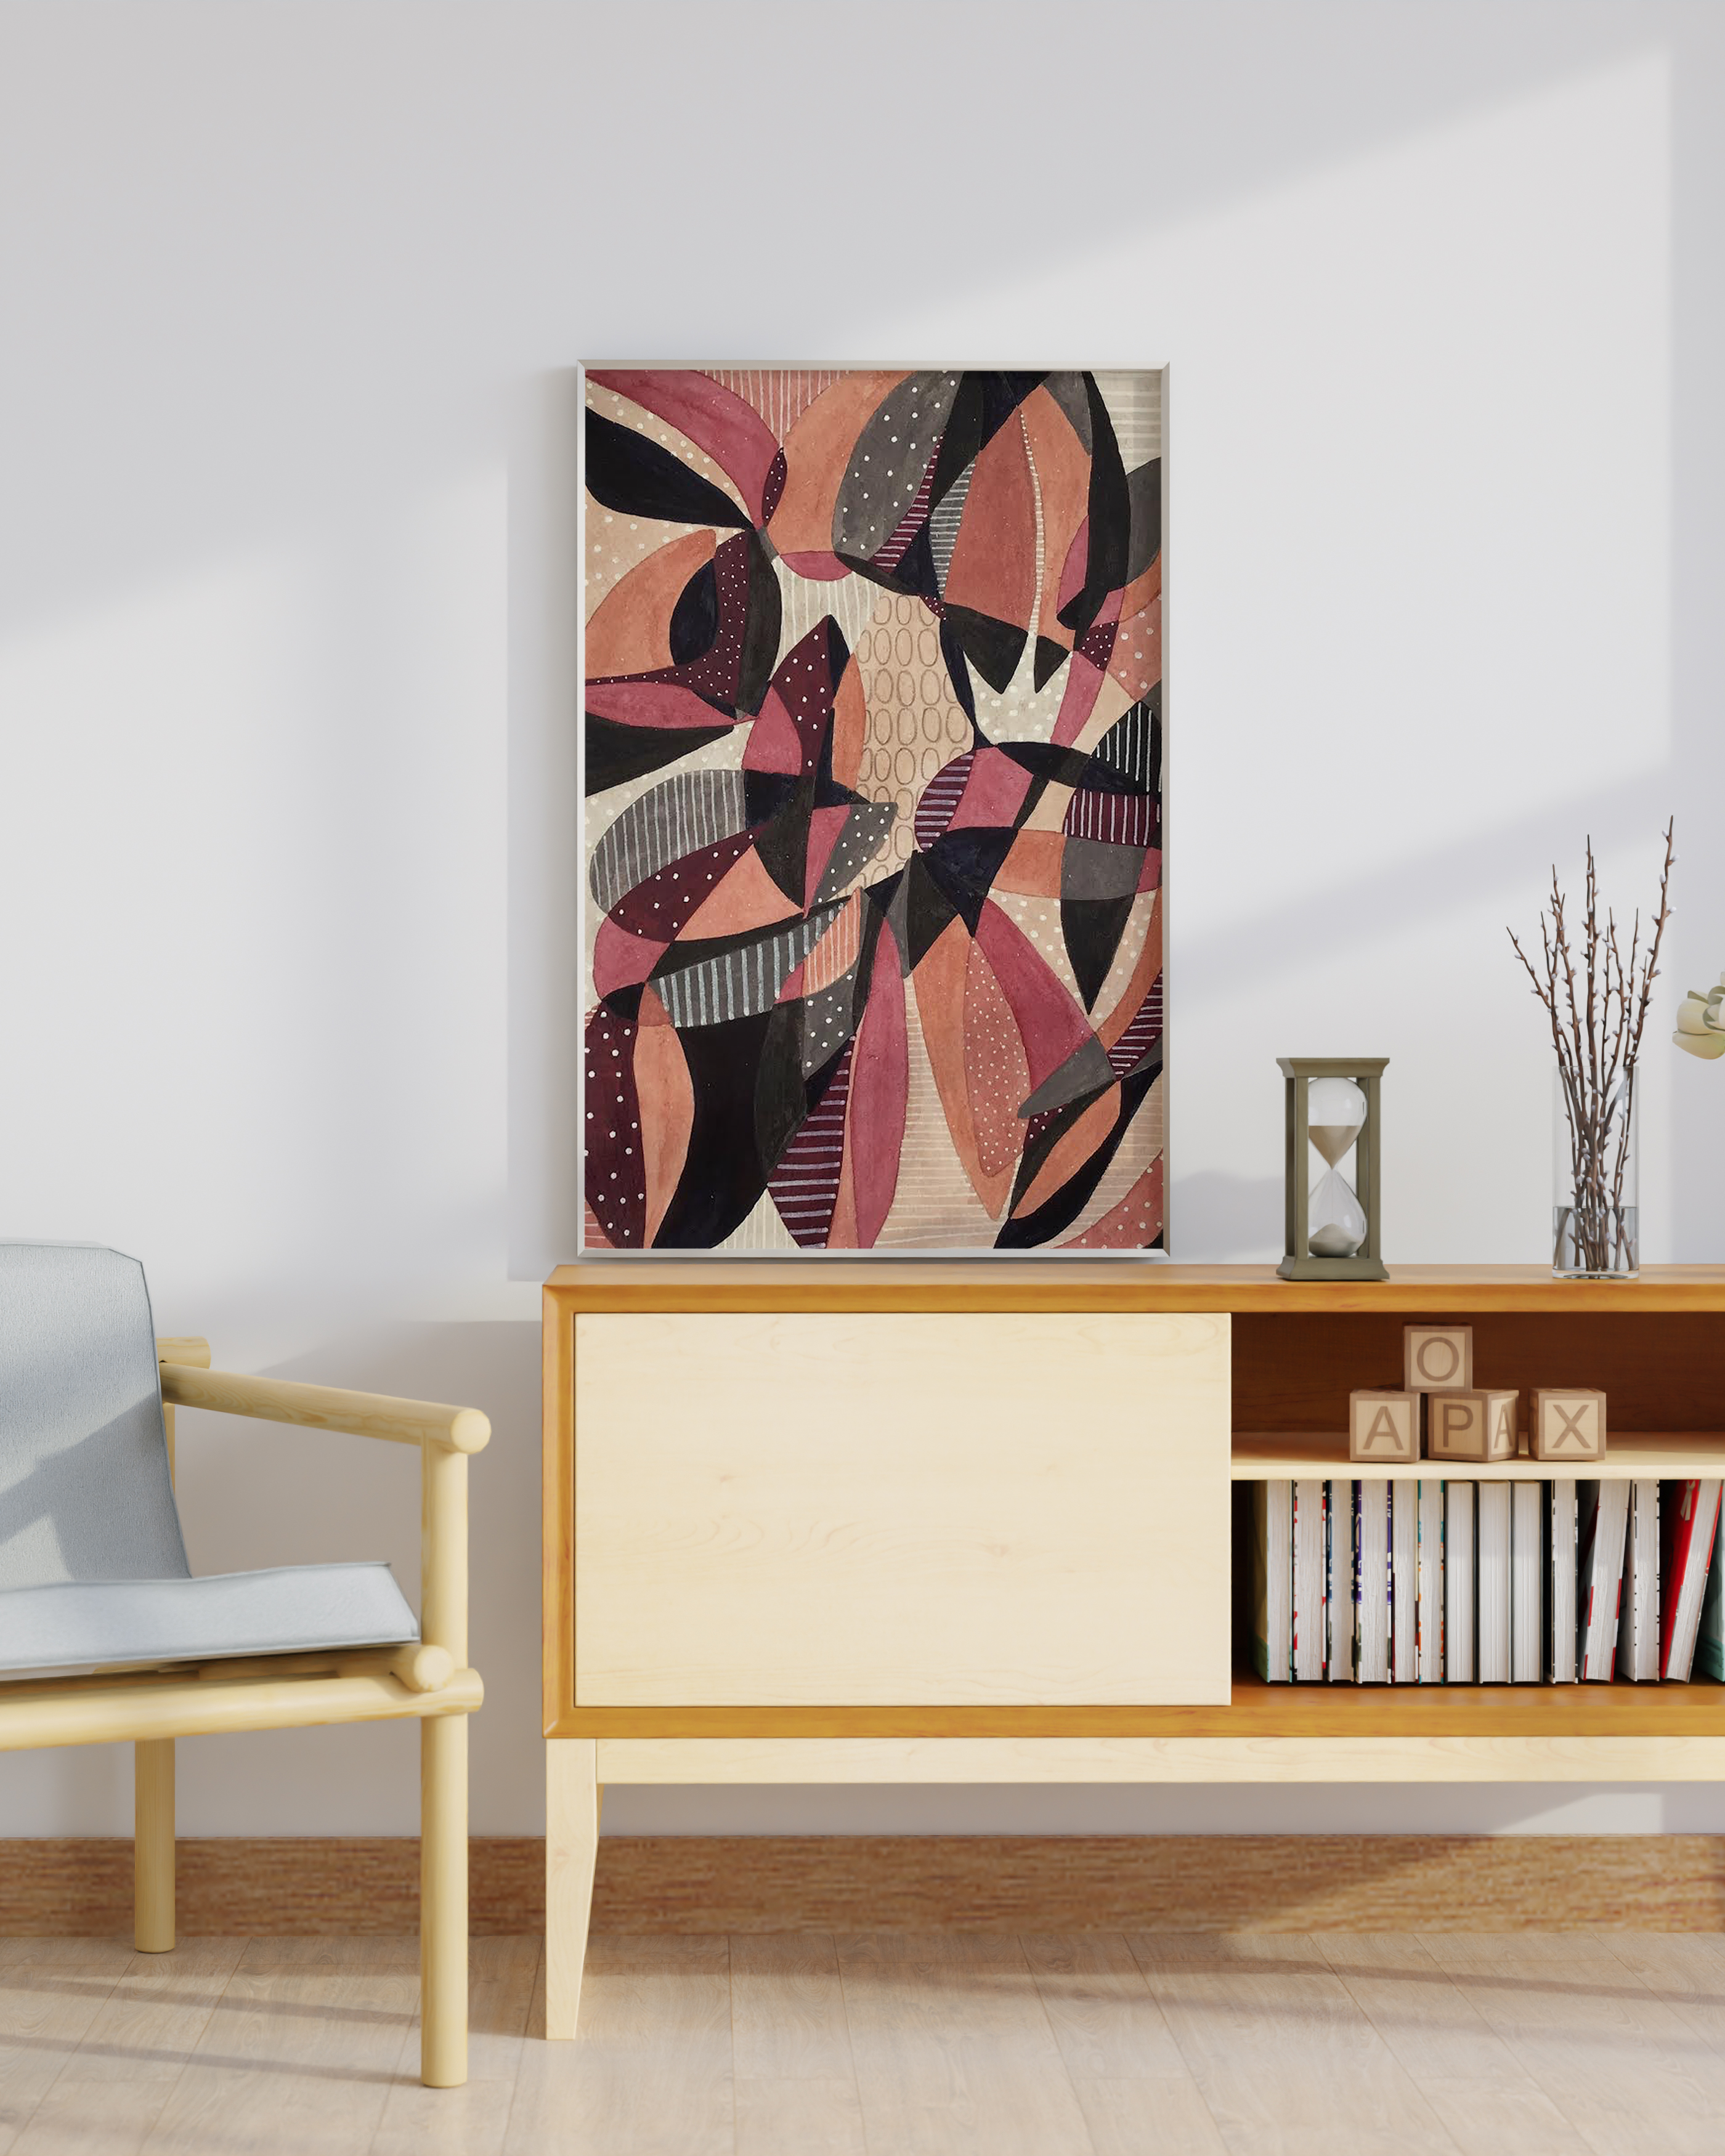 Peach red black and beige abstract art with overlapping shapes 